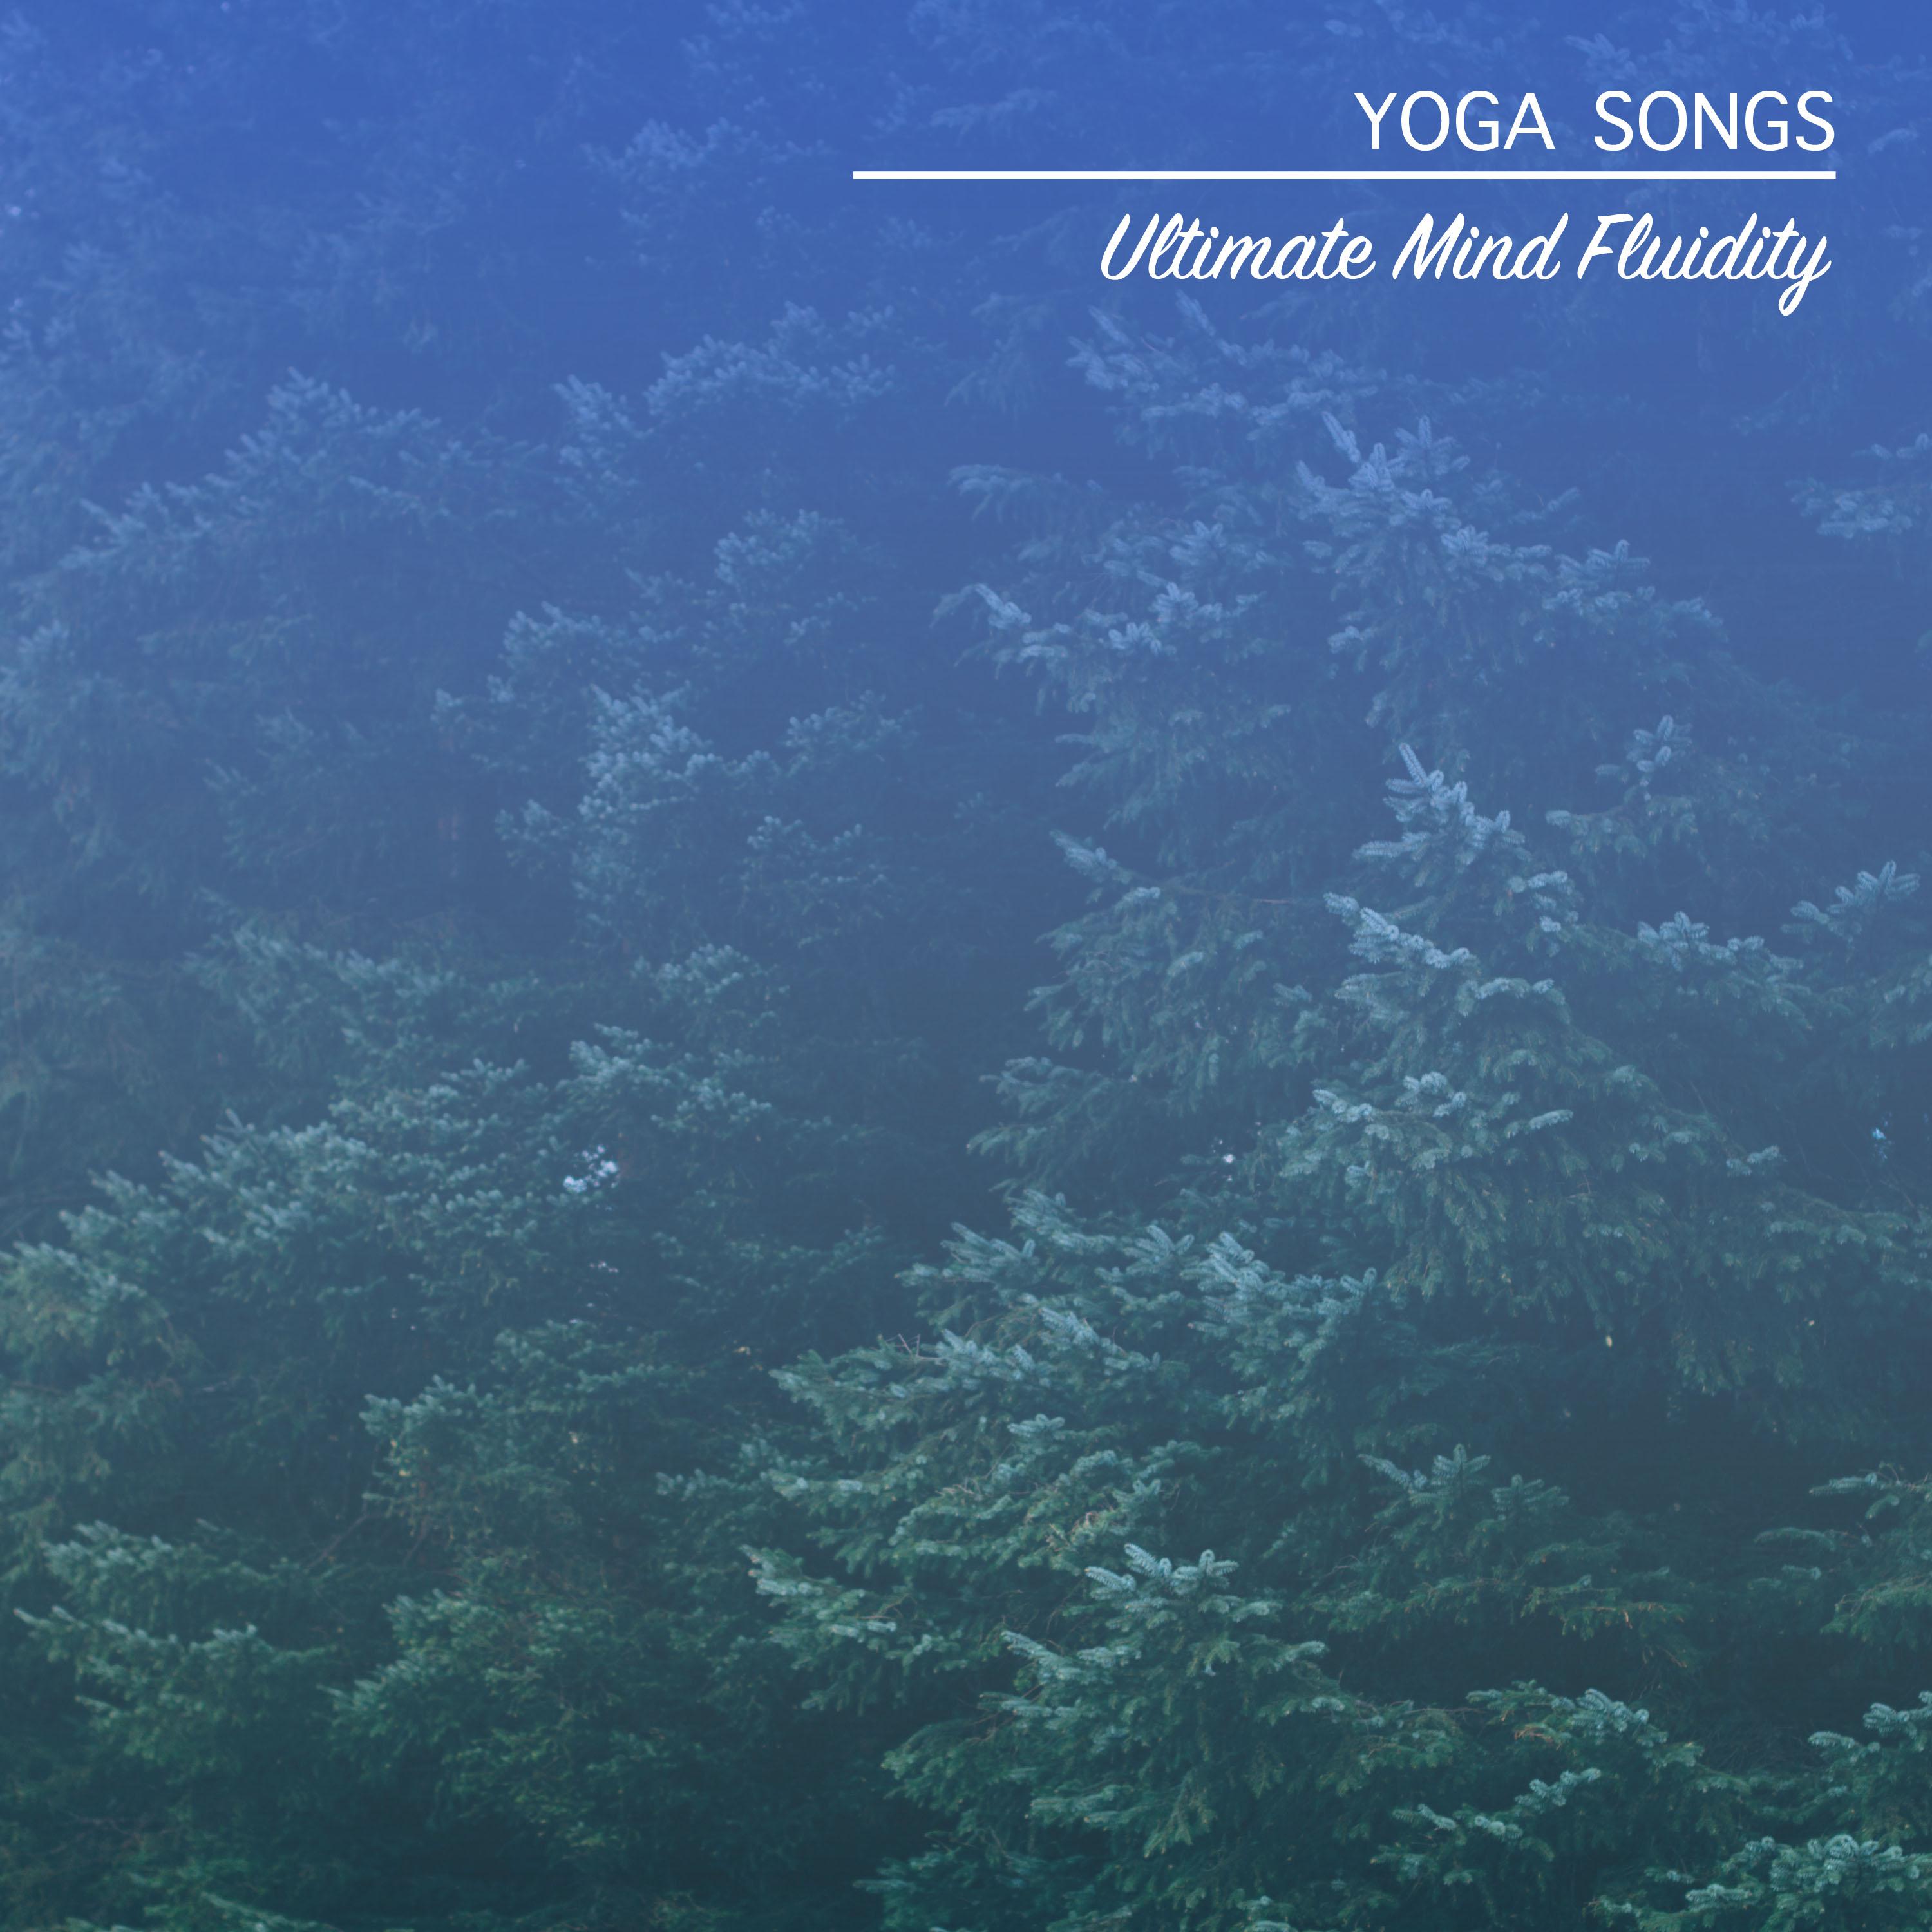 18 Relaxation Yoga Songs for Ultimate Mind Fluidity